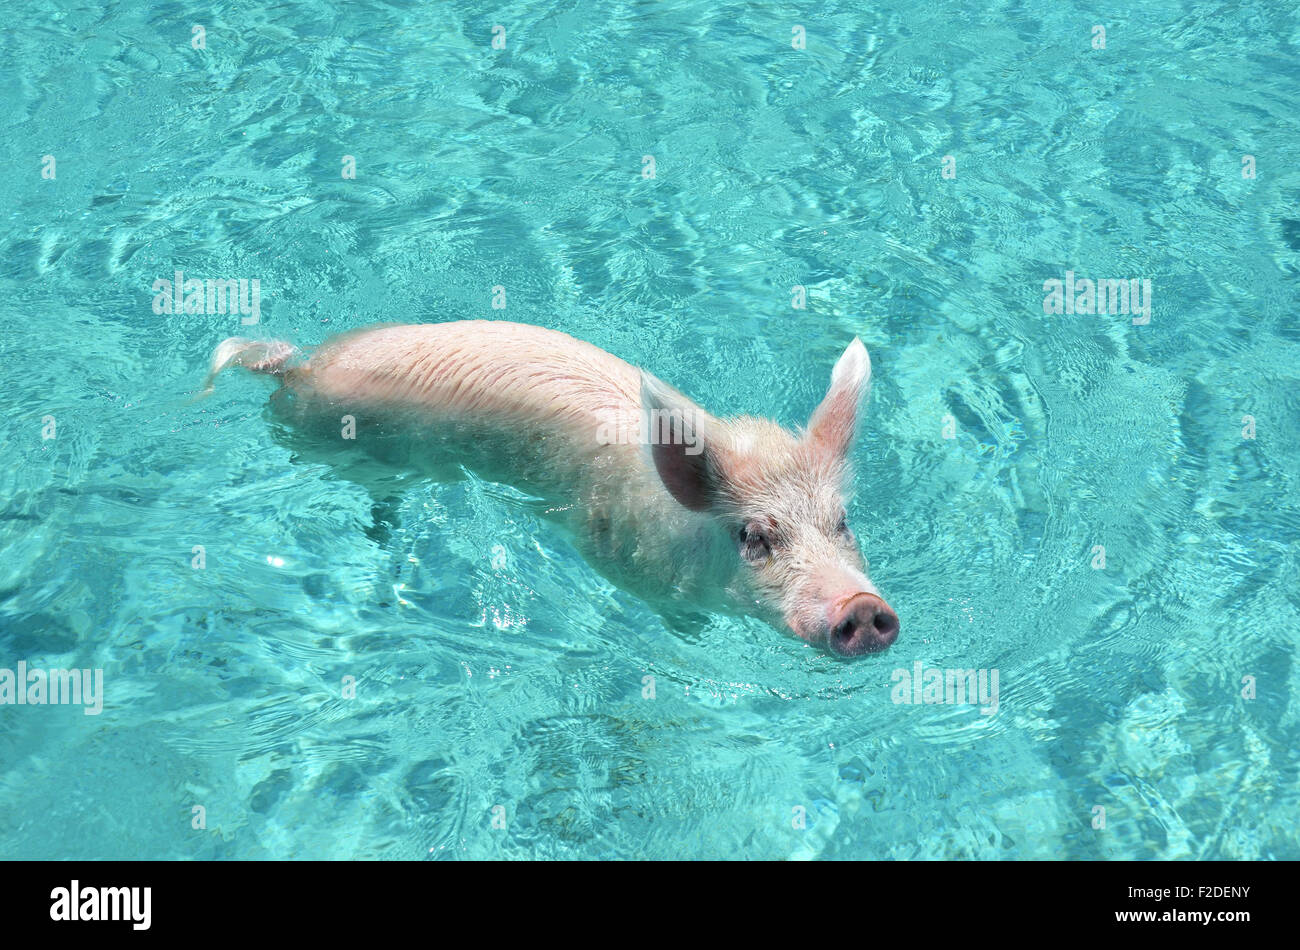 Pig in water Stock Photo